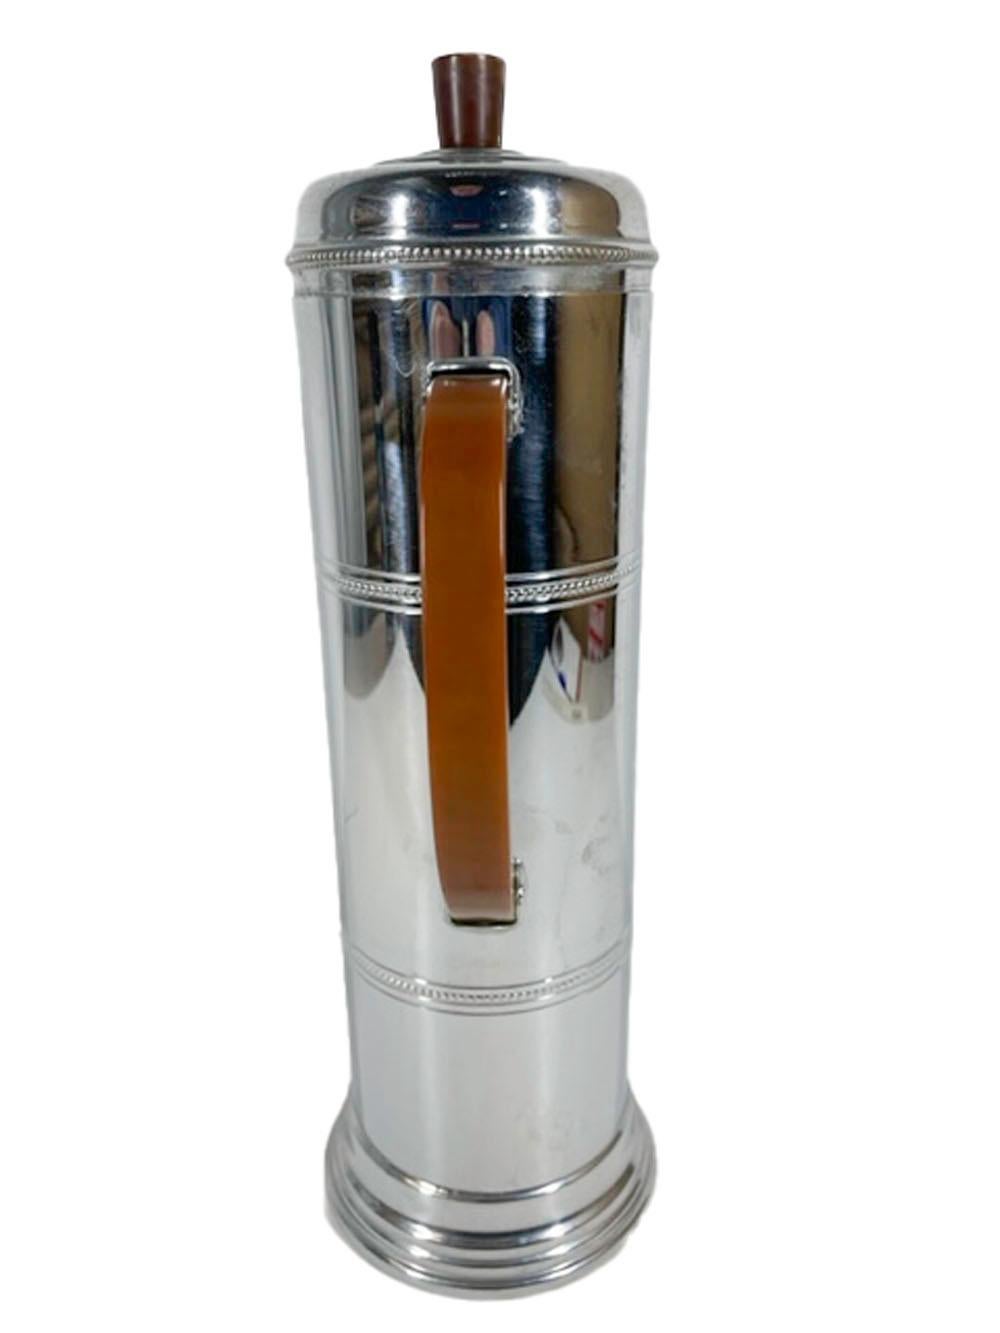 20th Century Art Deco Cylindrical Chrome Cocktail Shaker with Chocolate Bakelite Handle